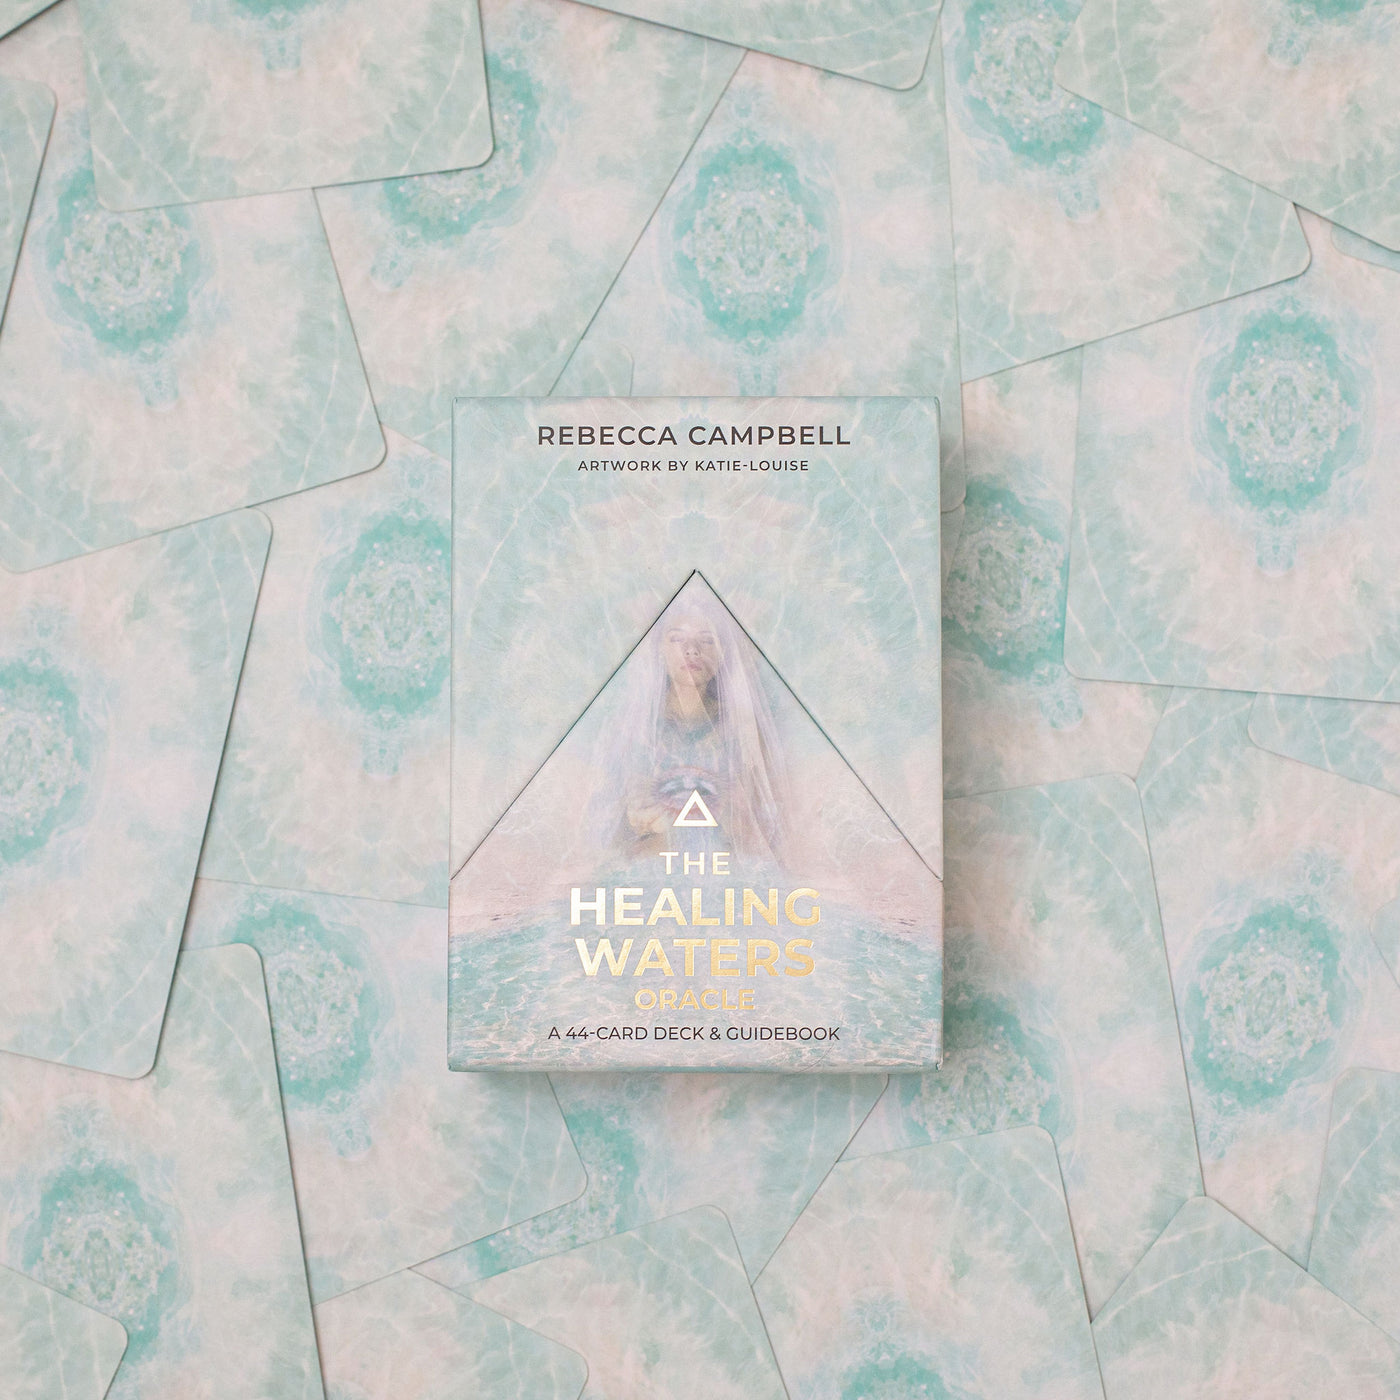 The Healing Waters Oracle Card by Rebecca Campbell